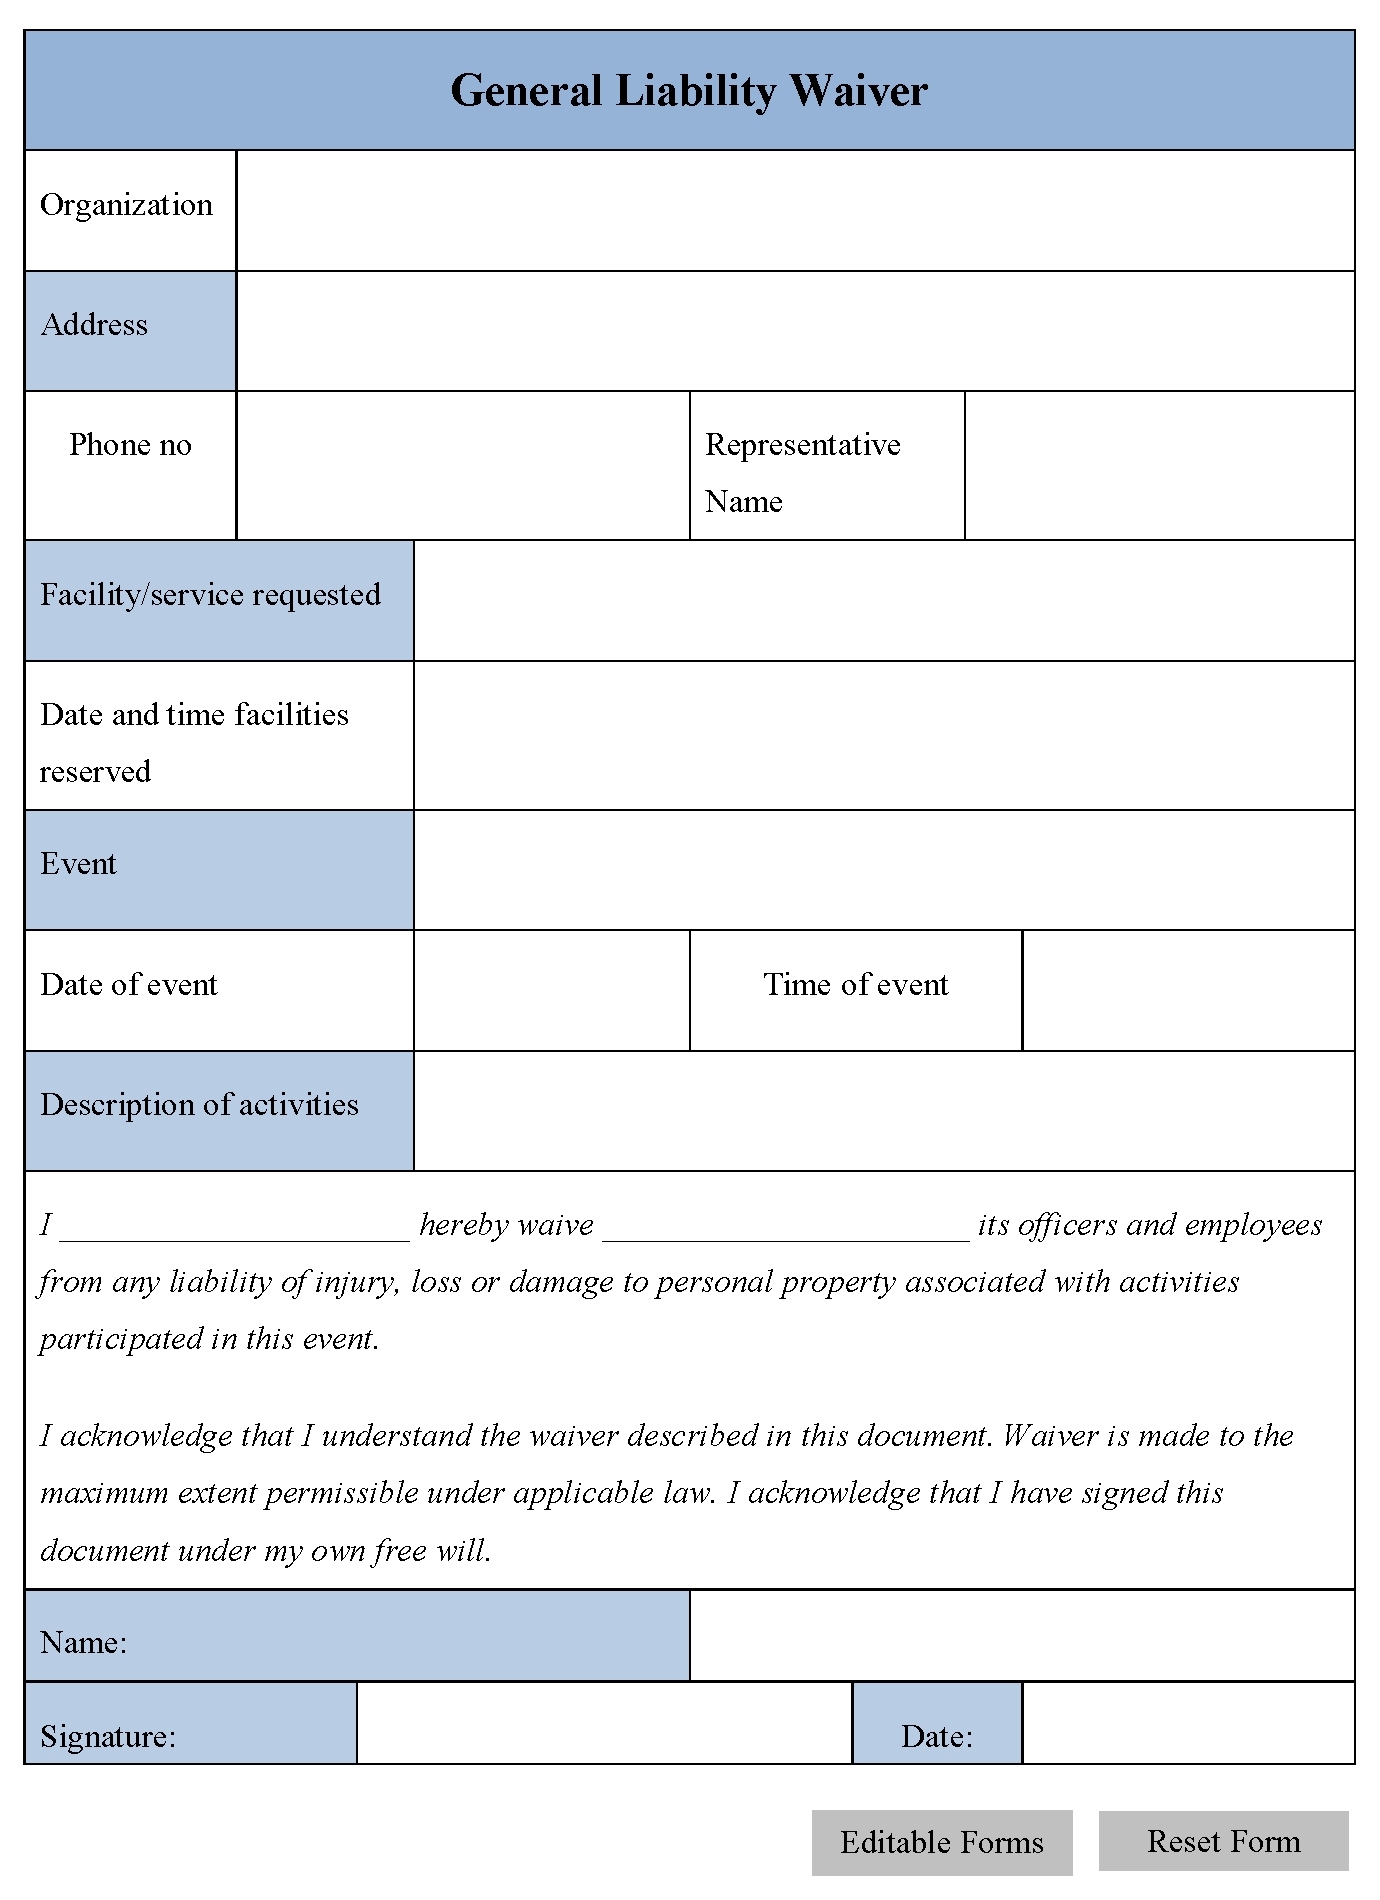 General Liability Waiver Form Editable Forms